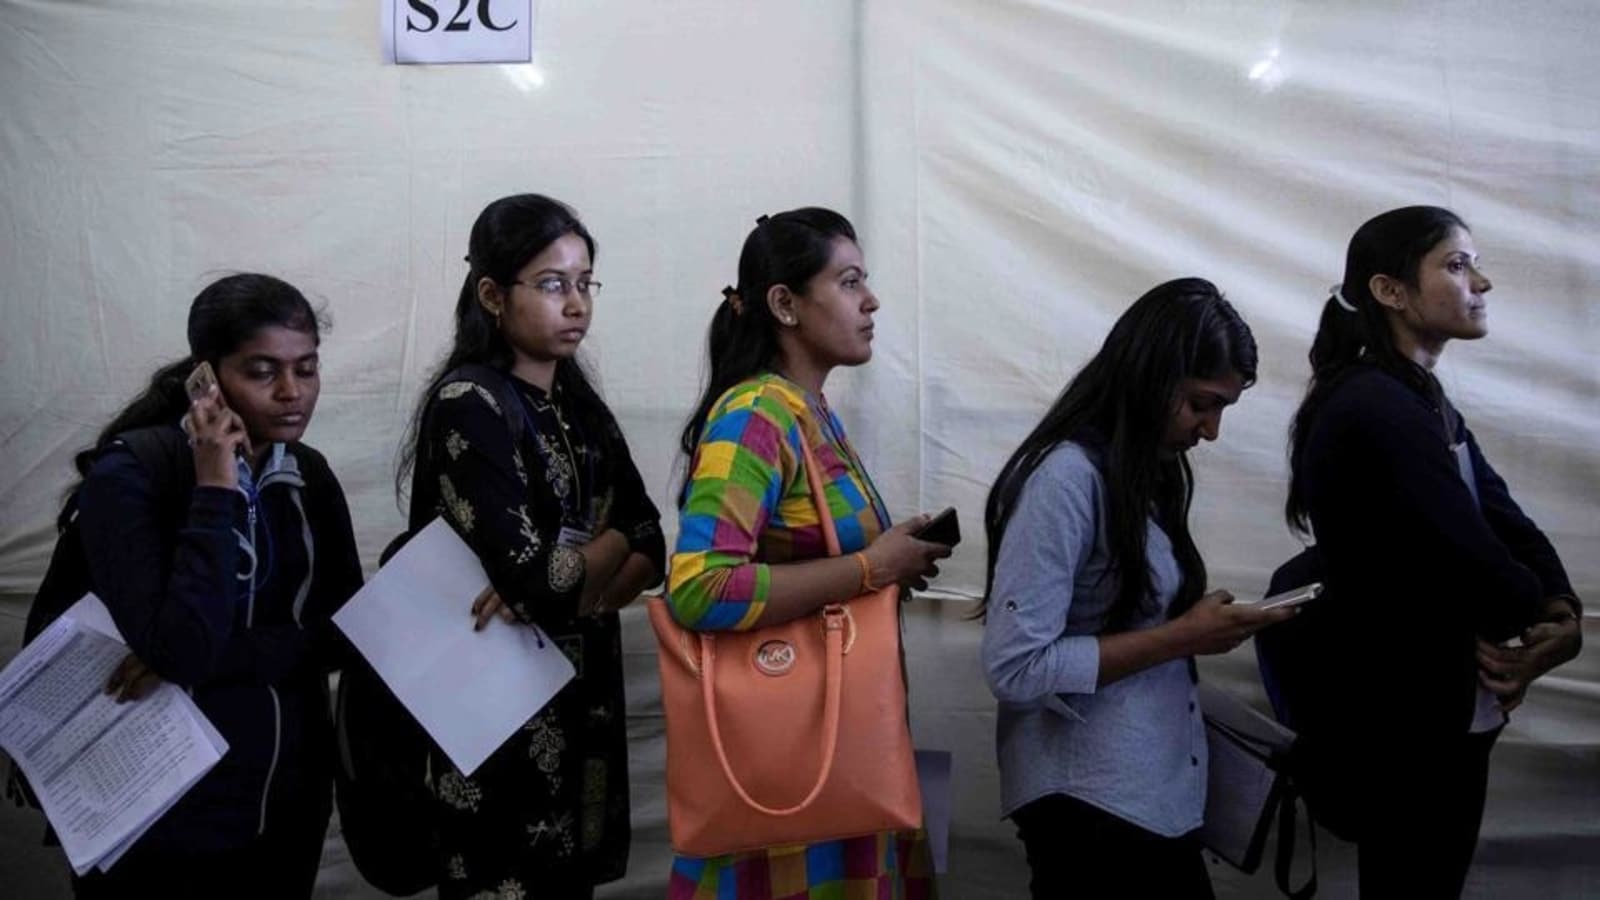 Unemployment rate in India rose to 10.3% in Oct-Dec 2020: Survey | Latest News India